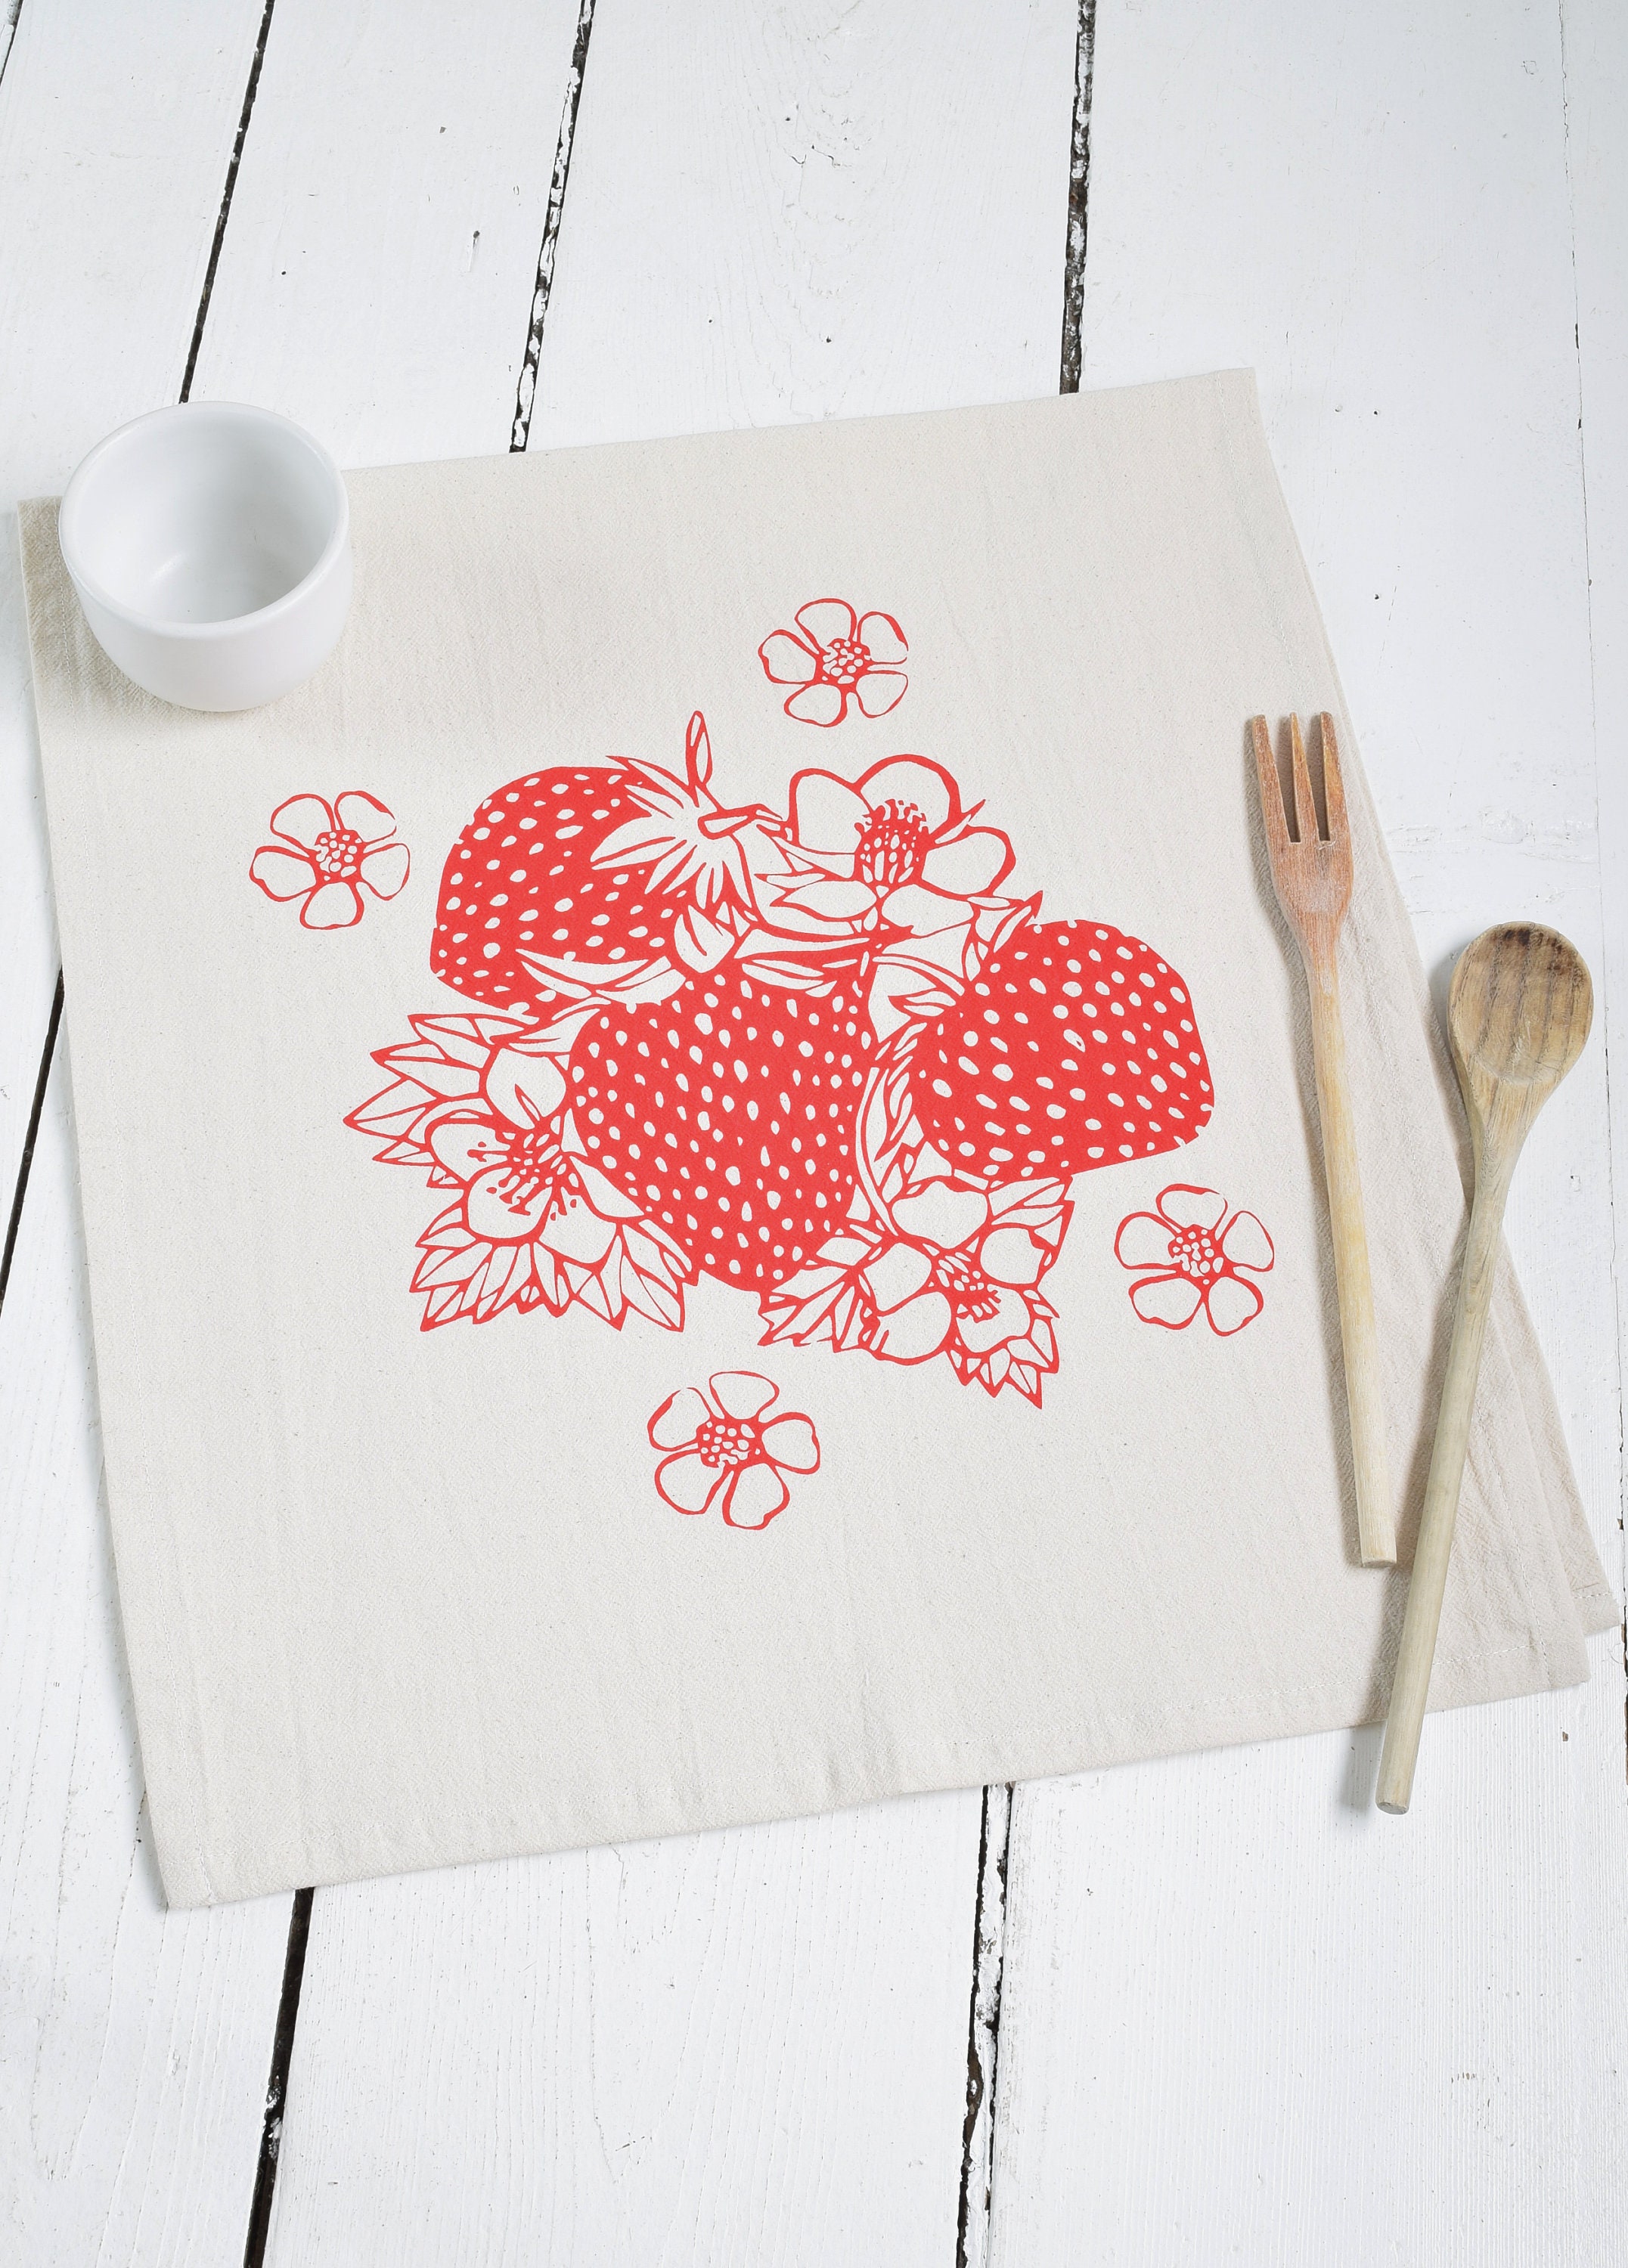 Now Designs Dish Towel, Floursack (Set of 3) Black/Oyster/White – Little  Red Hen